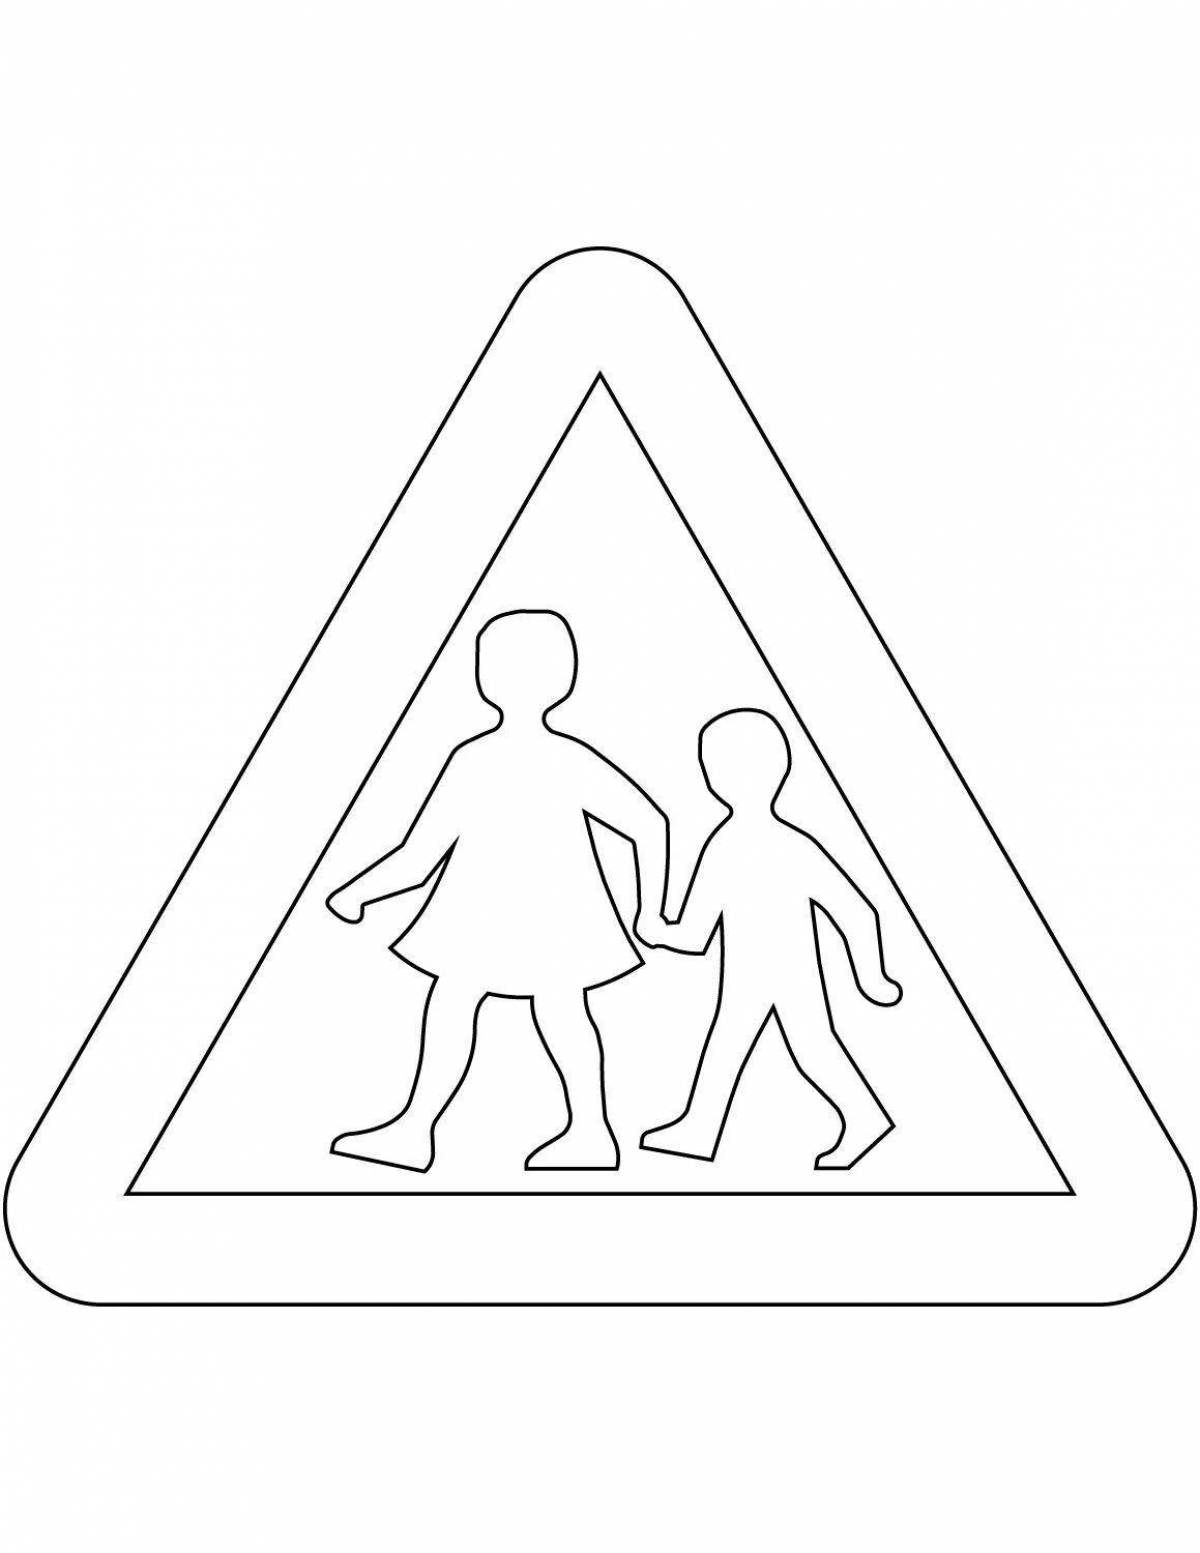 Clearly legible road sign for pedestrians